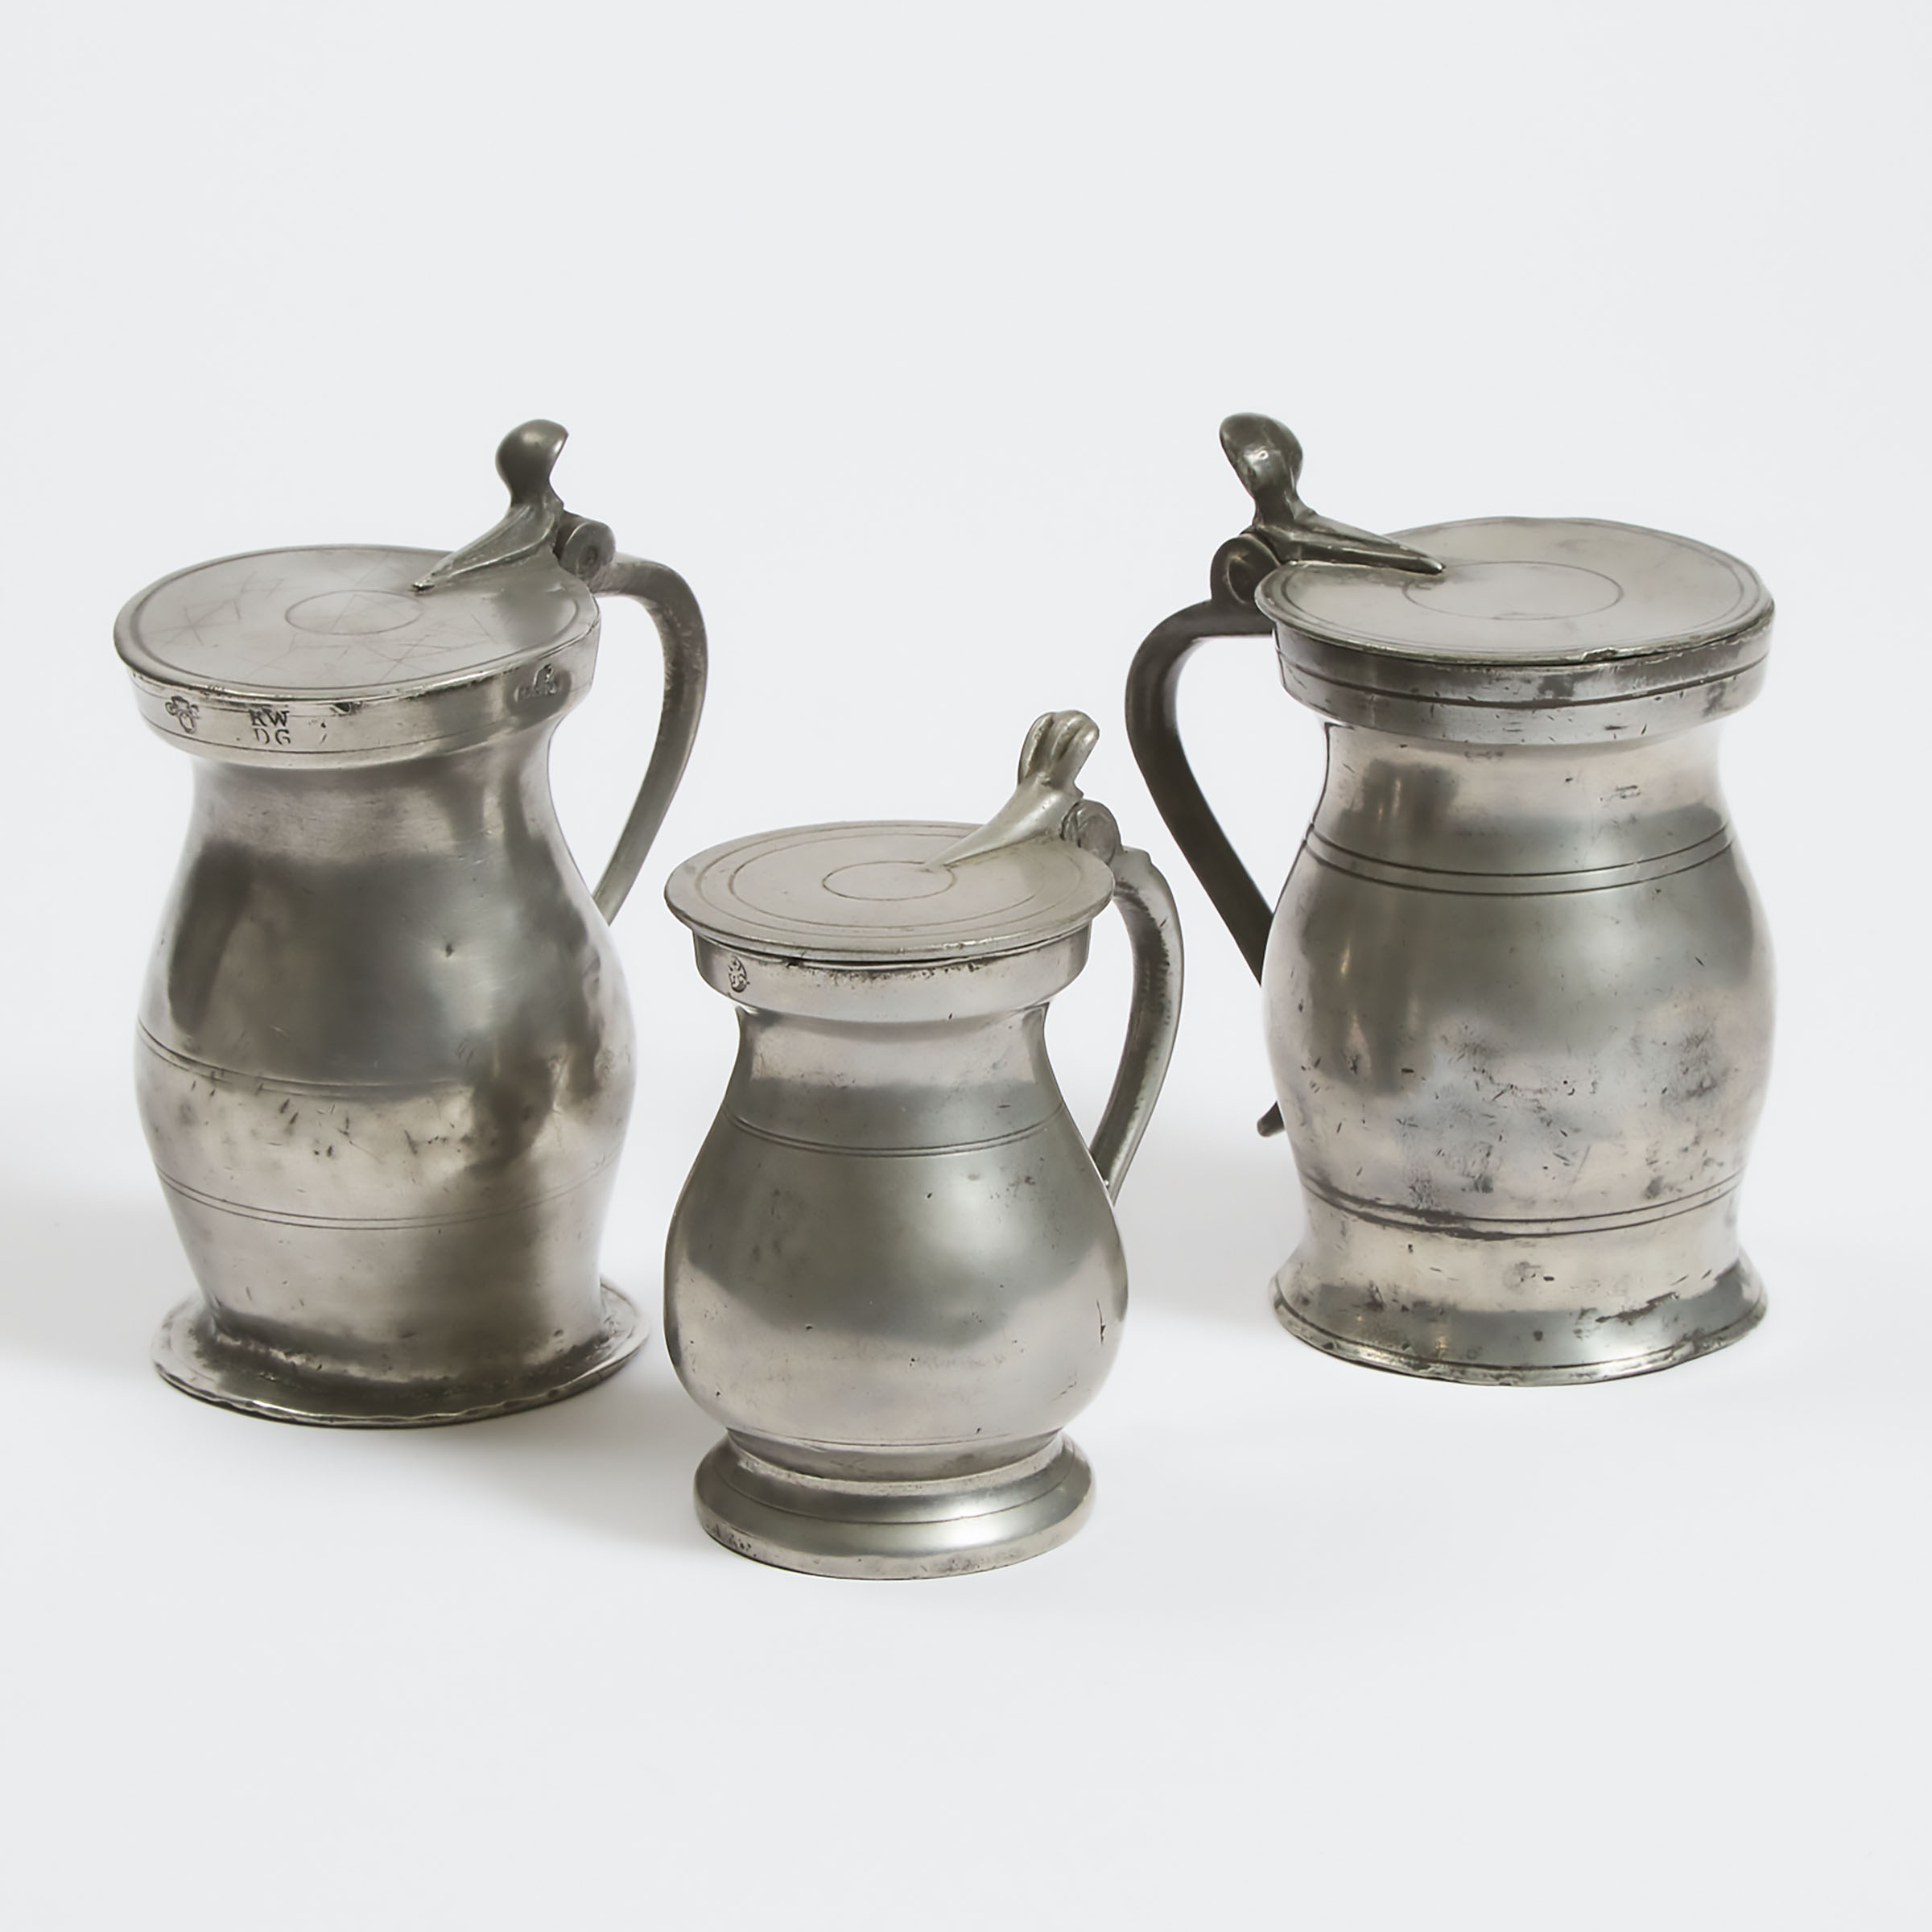 Three Scottish Pewter Flat Lidded Baluster Form Imperial Measures, 19th century